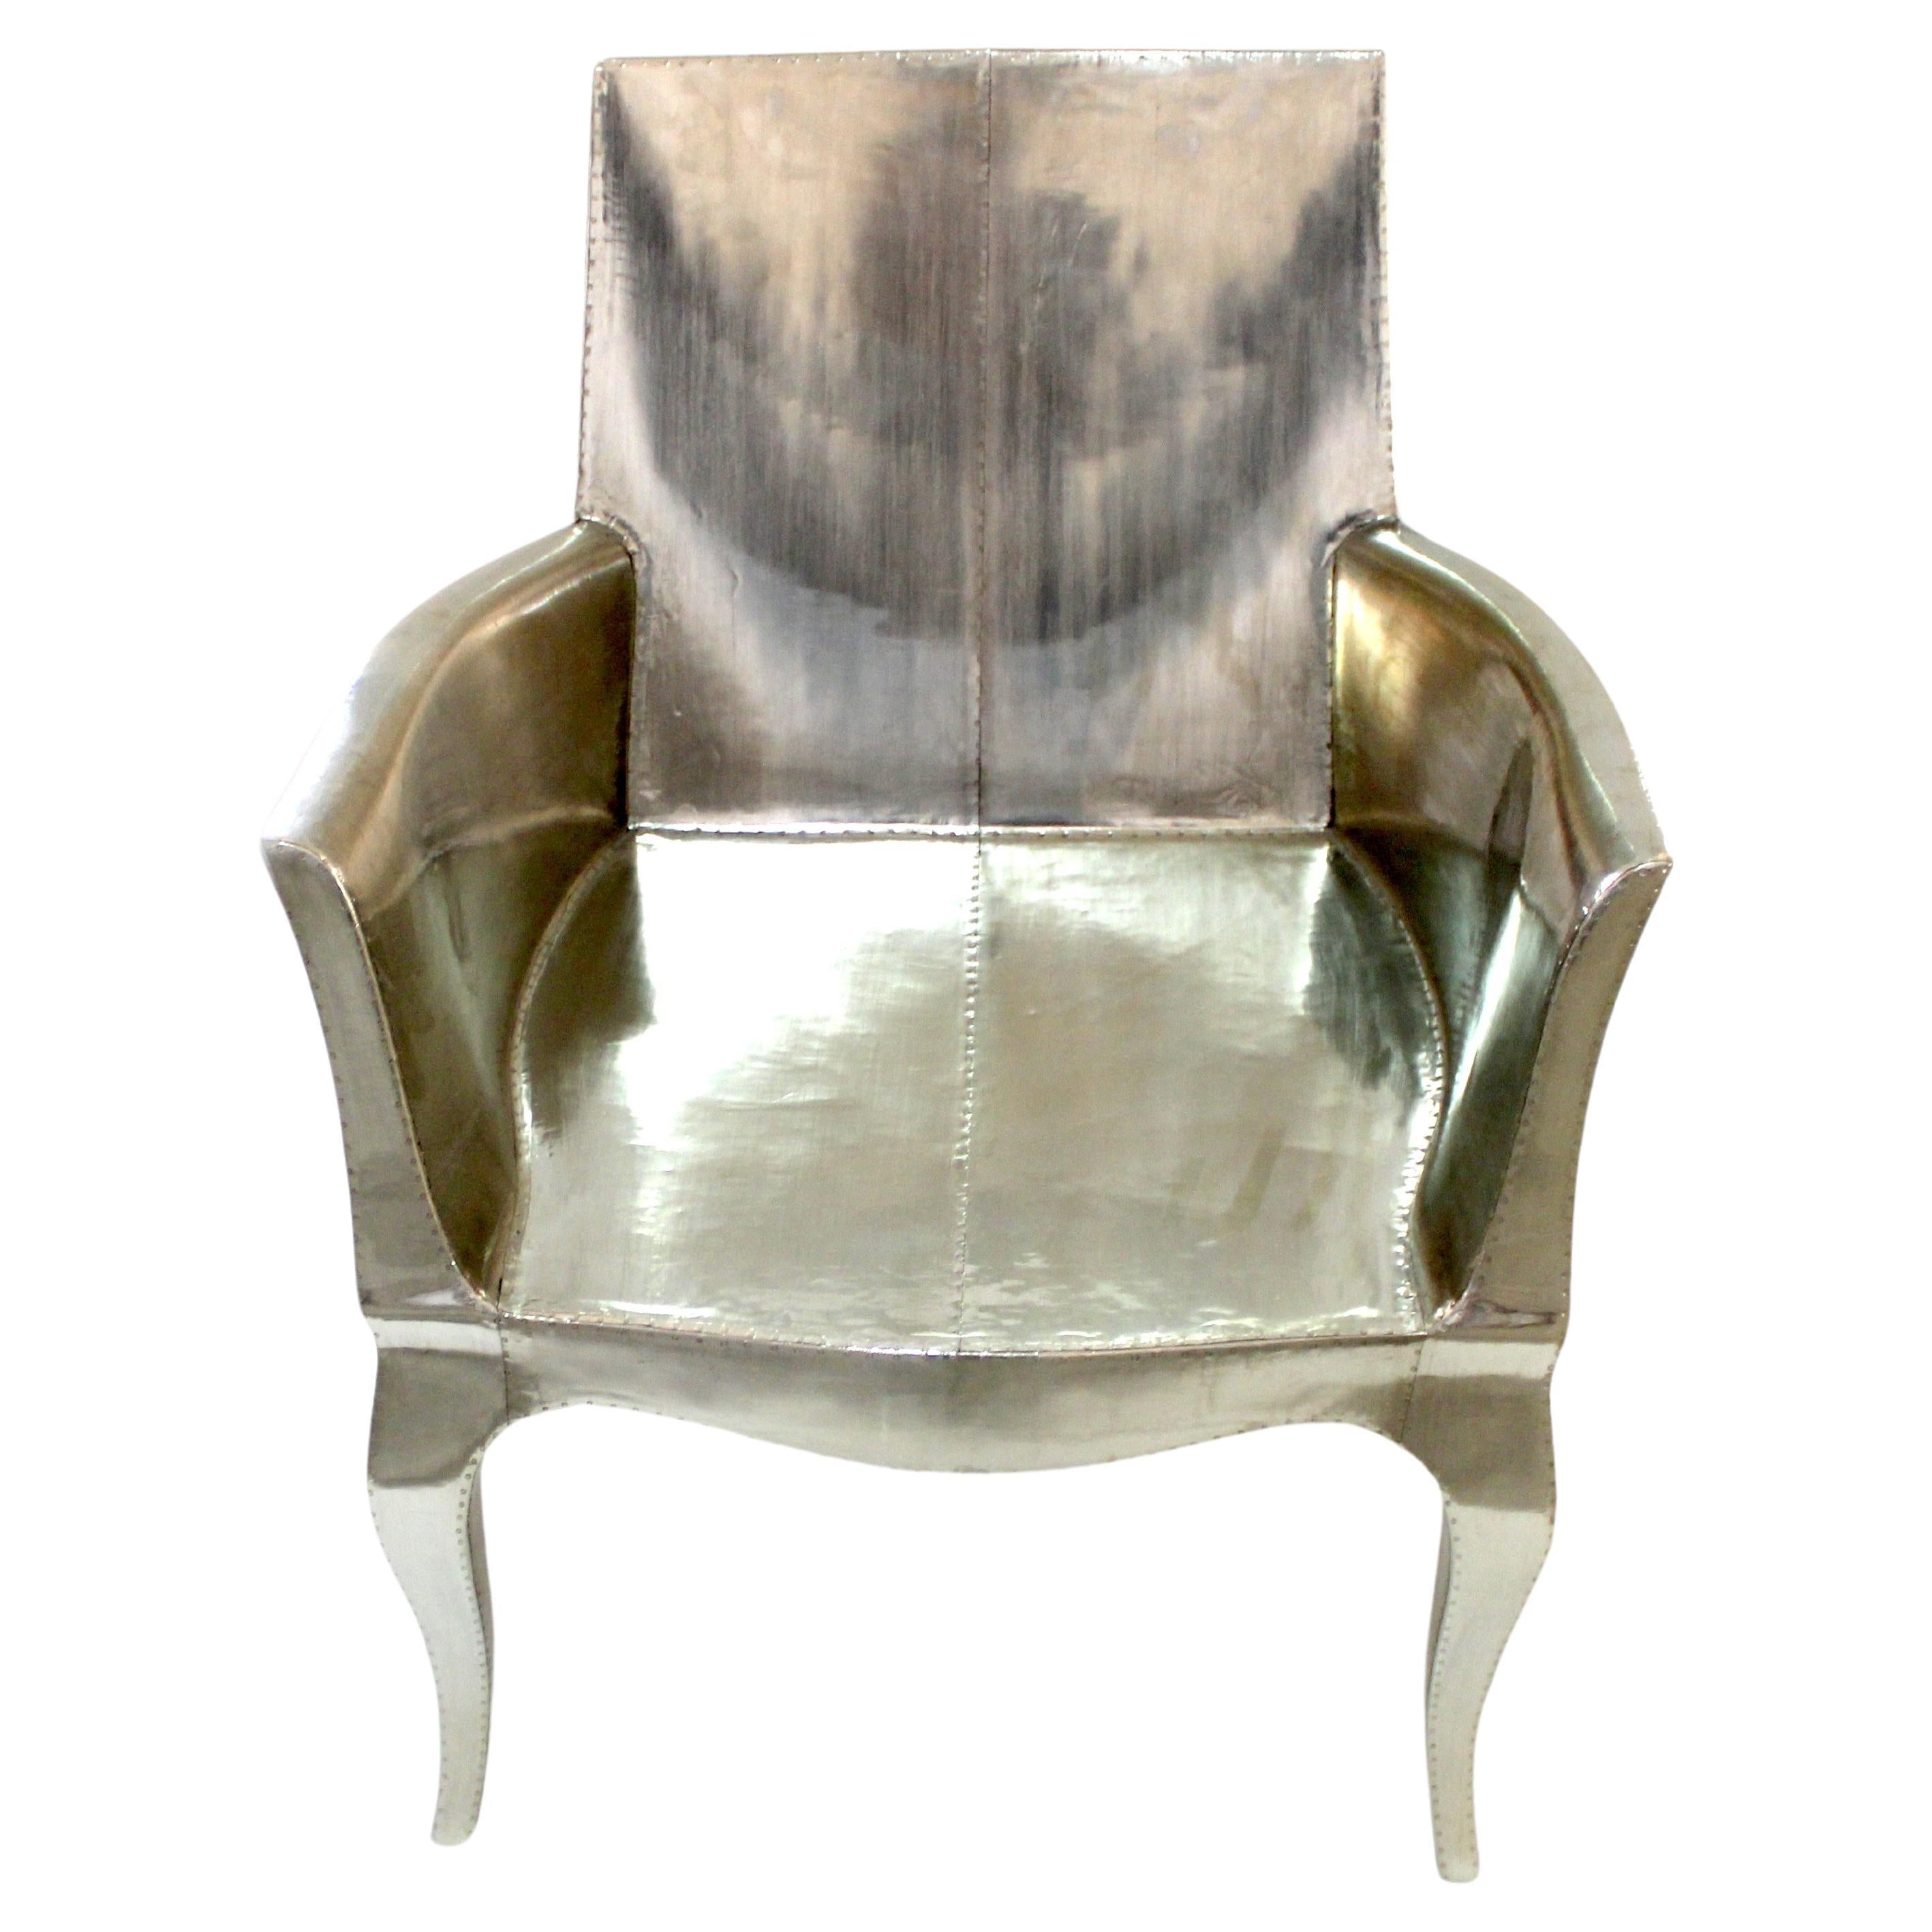 Art Deco Accent Chair in Smooth White Bronze by Paul Mathieu for S. Odegard